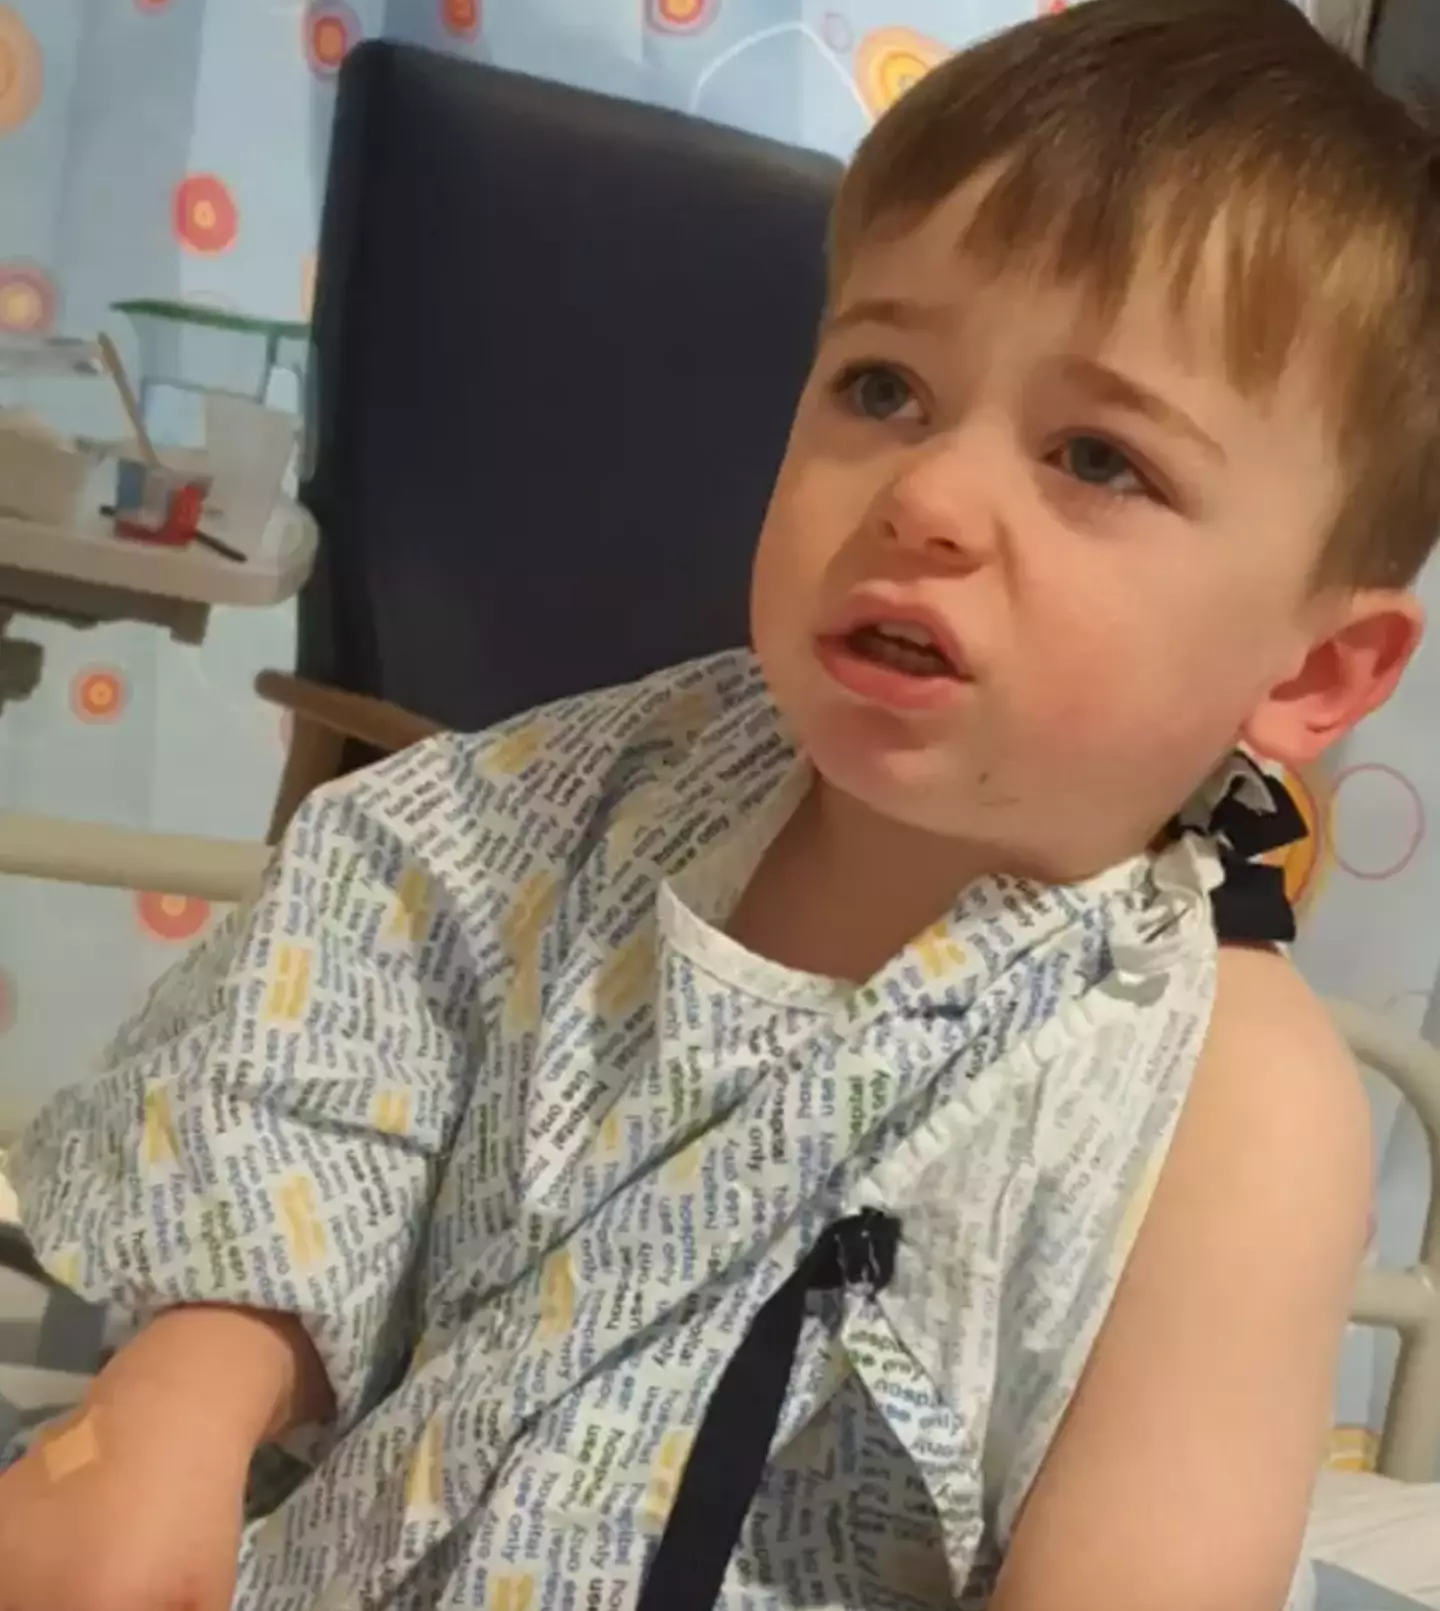 Three-year-old Angus was also rushed to hospital following probable glycerol toxicity.